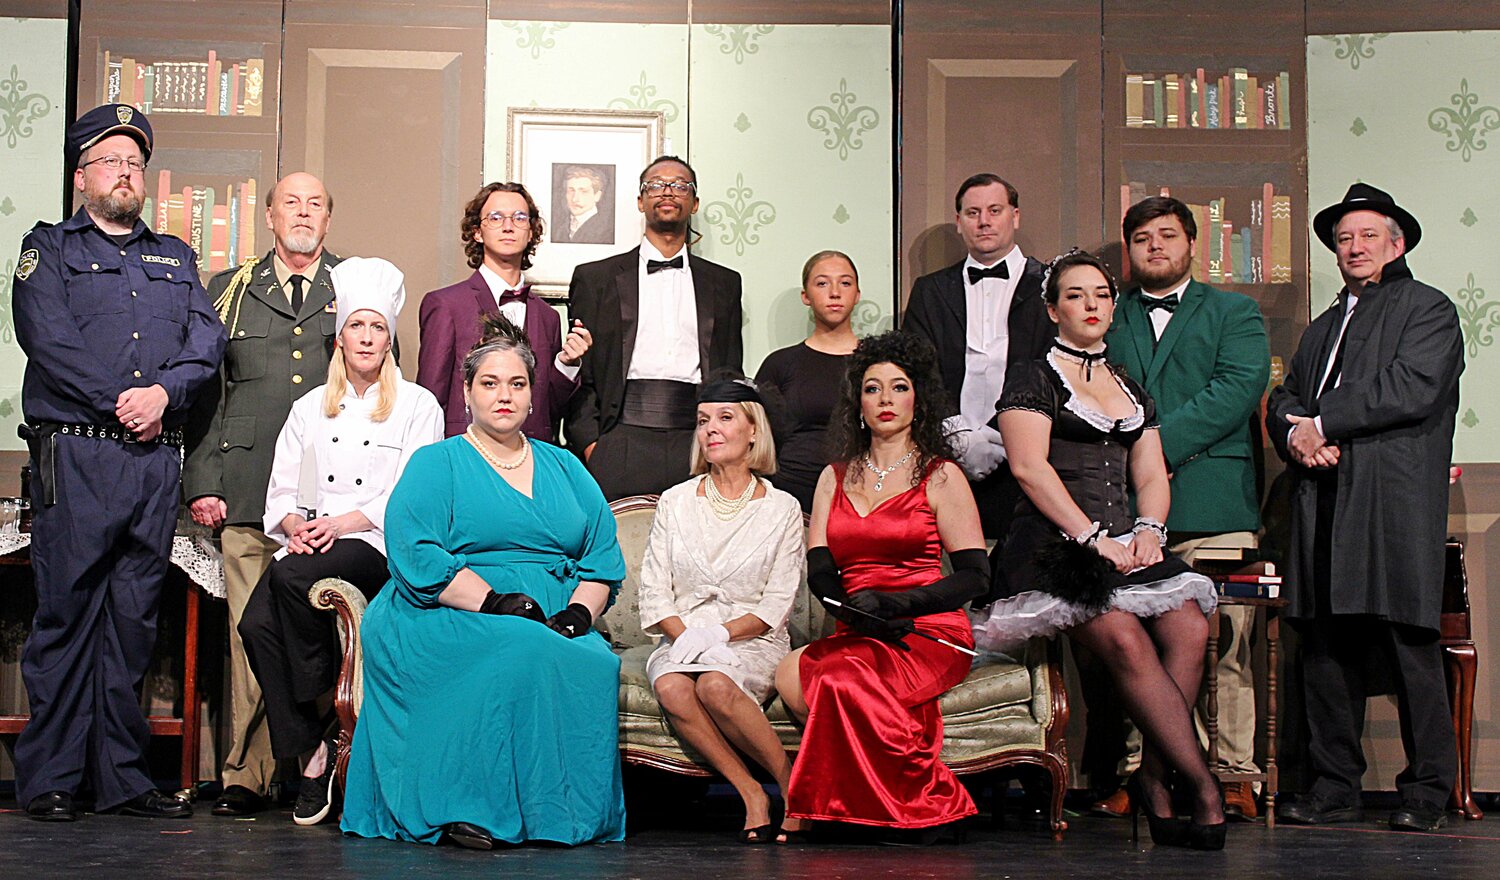 “Clue: On Stage” will be performed Thursday through Sunday by The Center Players Community Theatre at Madison Square Center for the Arts on Main Street in Madison. Thursday’s show will be a dinner theater with tickets costing $35 for a three-course meal, beginning at 7 p.m. and the show at 7:30 p.m. The shows on Friday and Saturday are at 7:30 p.m. and the Sunday show is at 2:30 p.m. Tickets are available at www.thecenterplayers.org and cost $15 for adults and $12 for students/seniors/military. Cast members in this real-life version of a classic board game are, front from left, Courtney Haindel, Mandy Hackman, Connie Black, Roxie Hood, Pheobe Whitley; back row, Steven Carter, Wayne Thomas, Samuel Smylie, Bradley Davis, Sims Jones, Vincent Jordan, Wyatt Wilson and Nathan Dunaway.